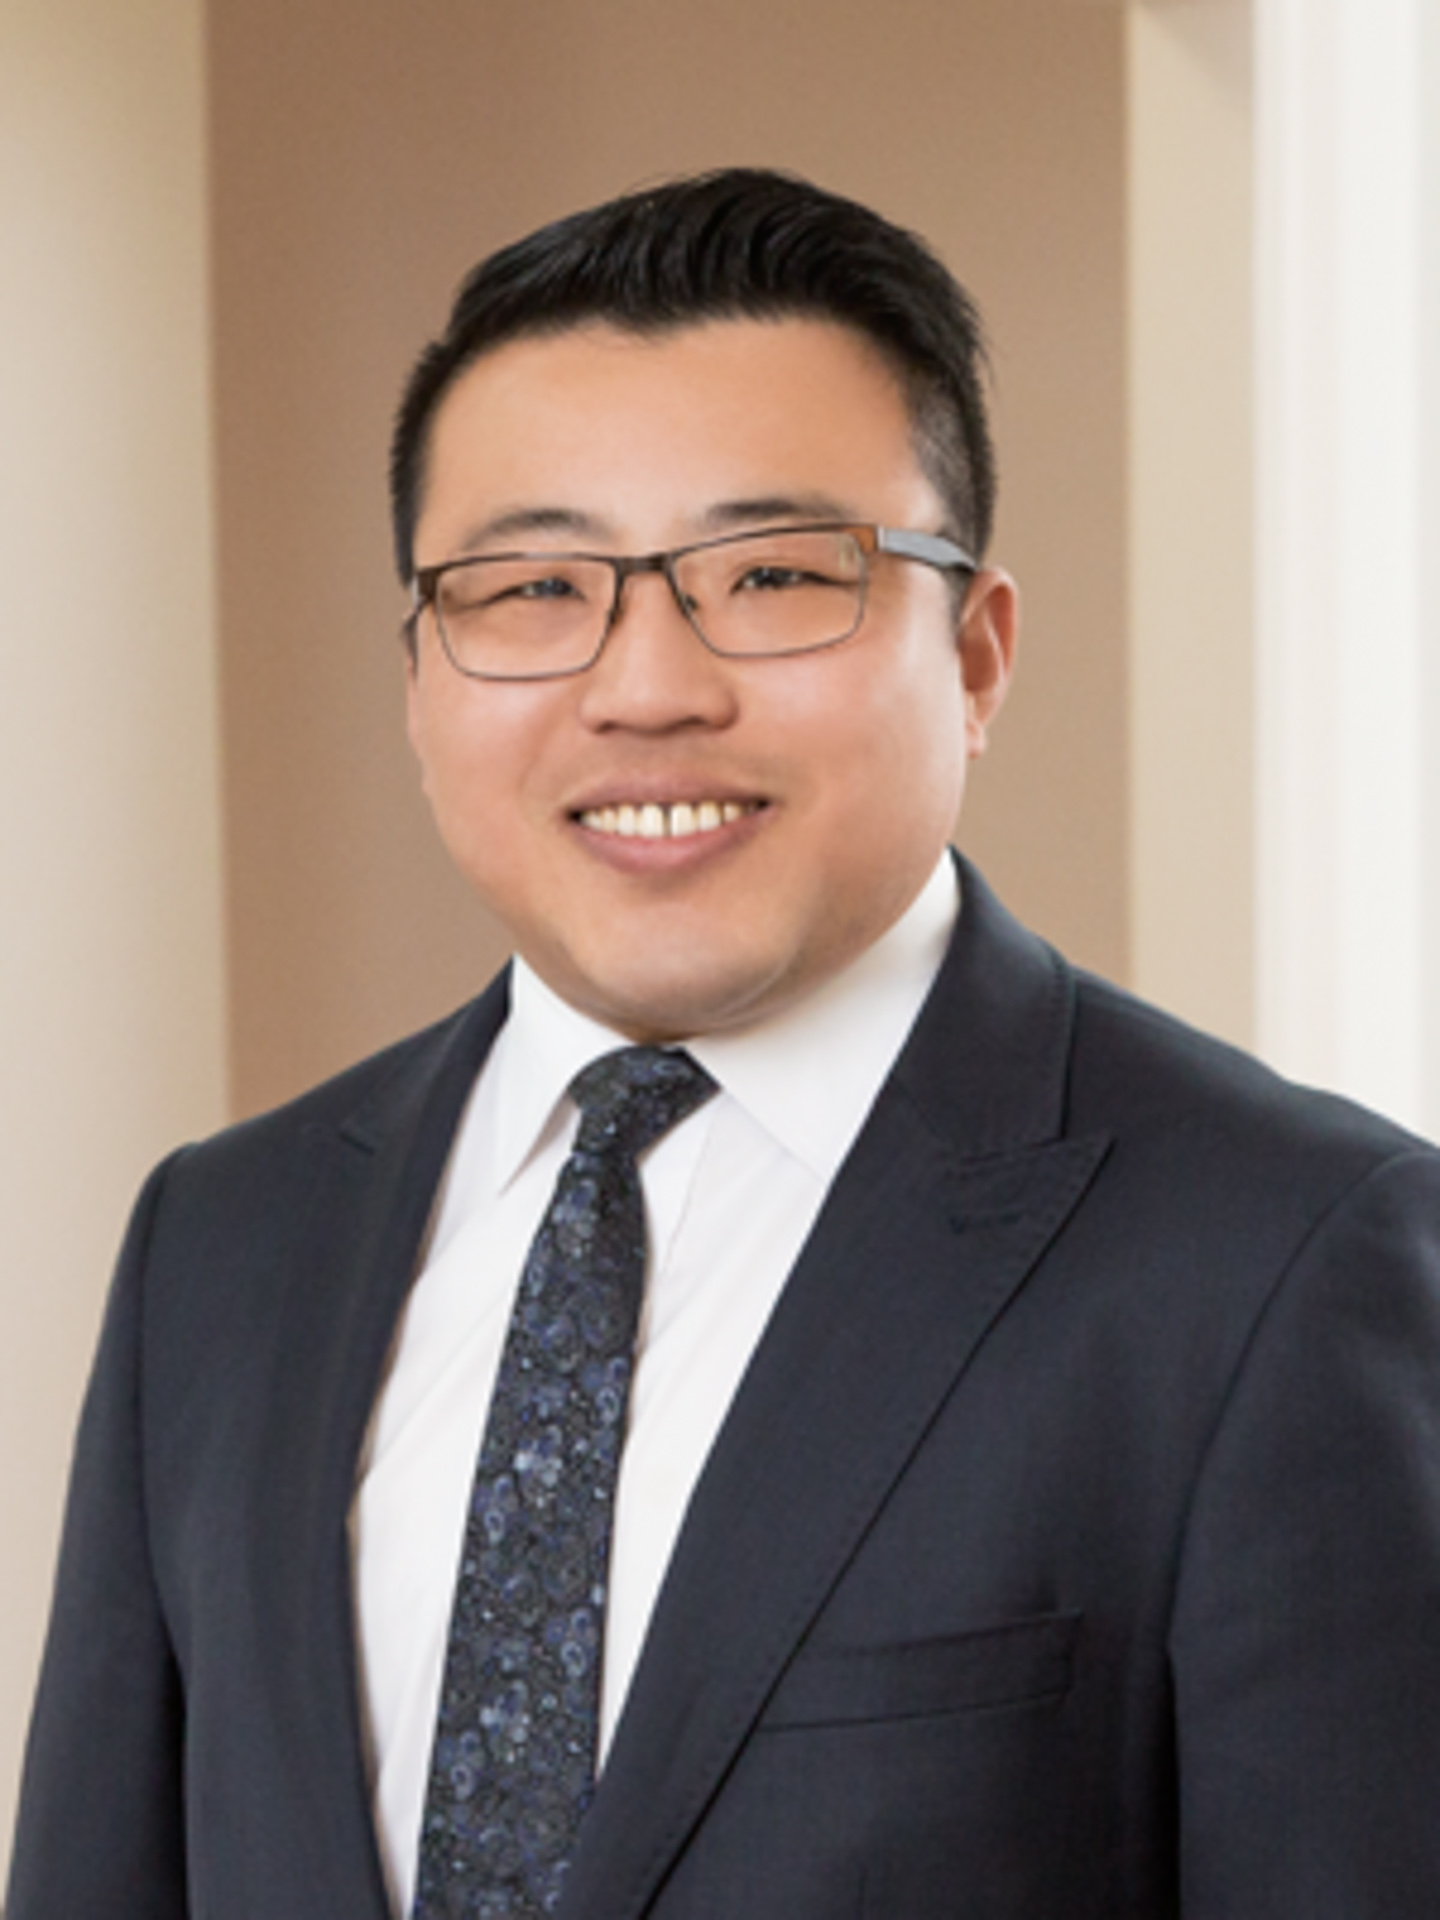 Mike Wang Real Estate Agent